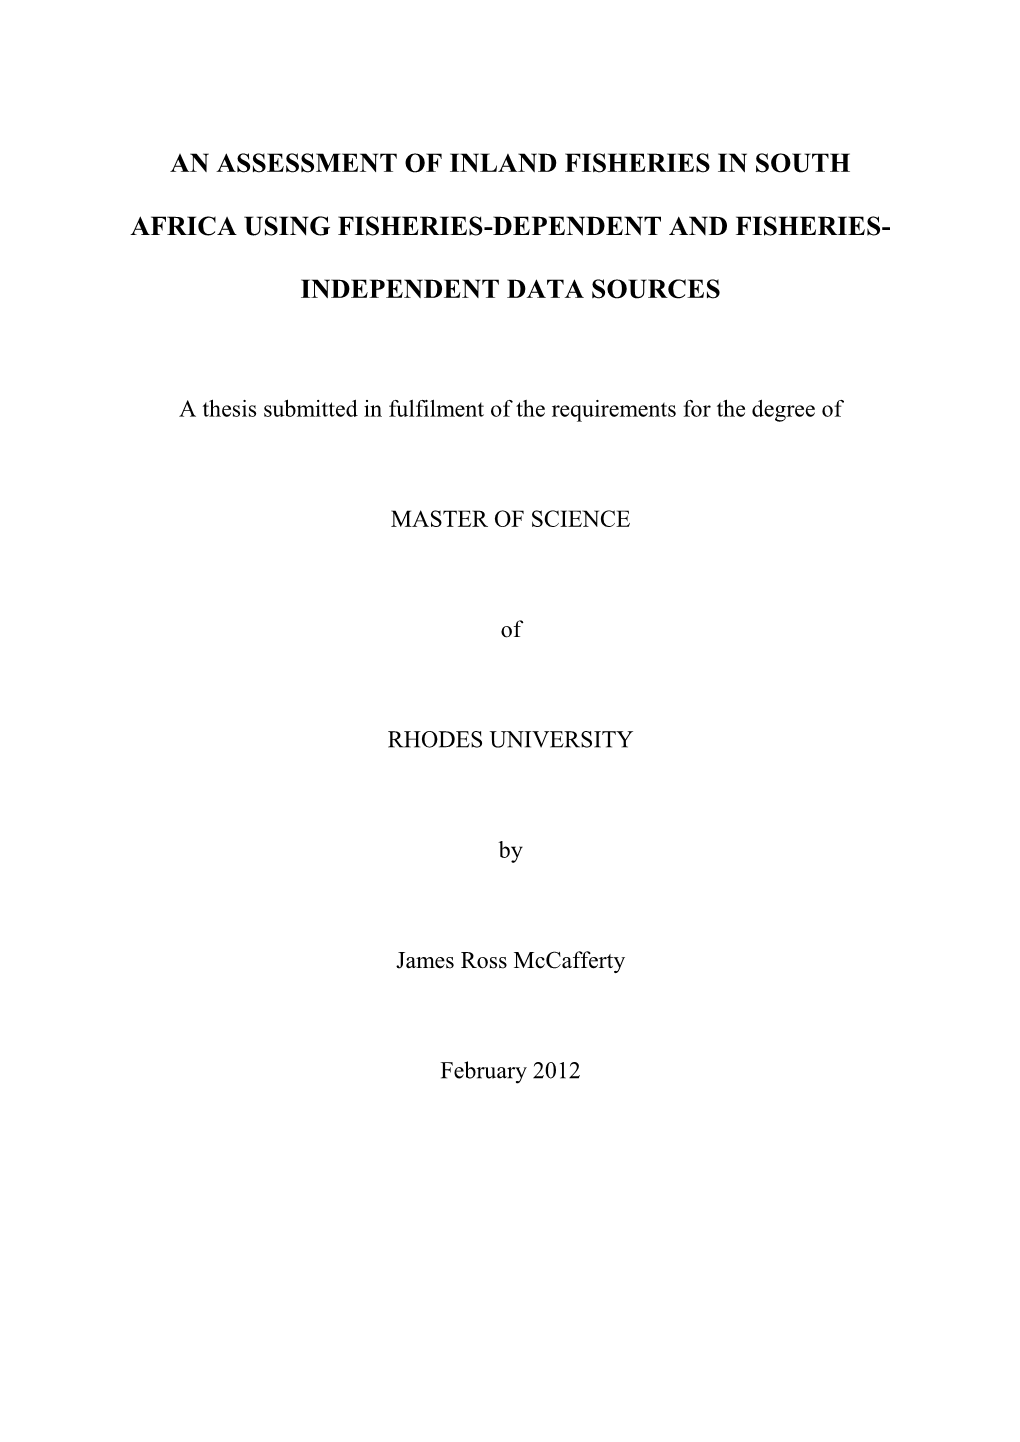 An Assessment of Inland Fisheries in South Africa